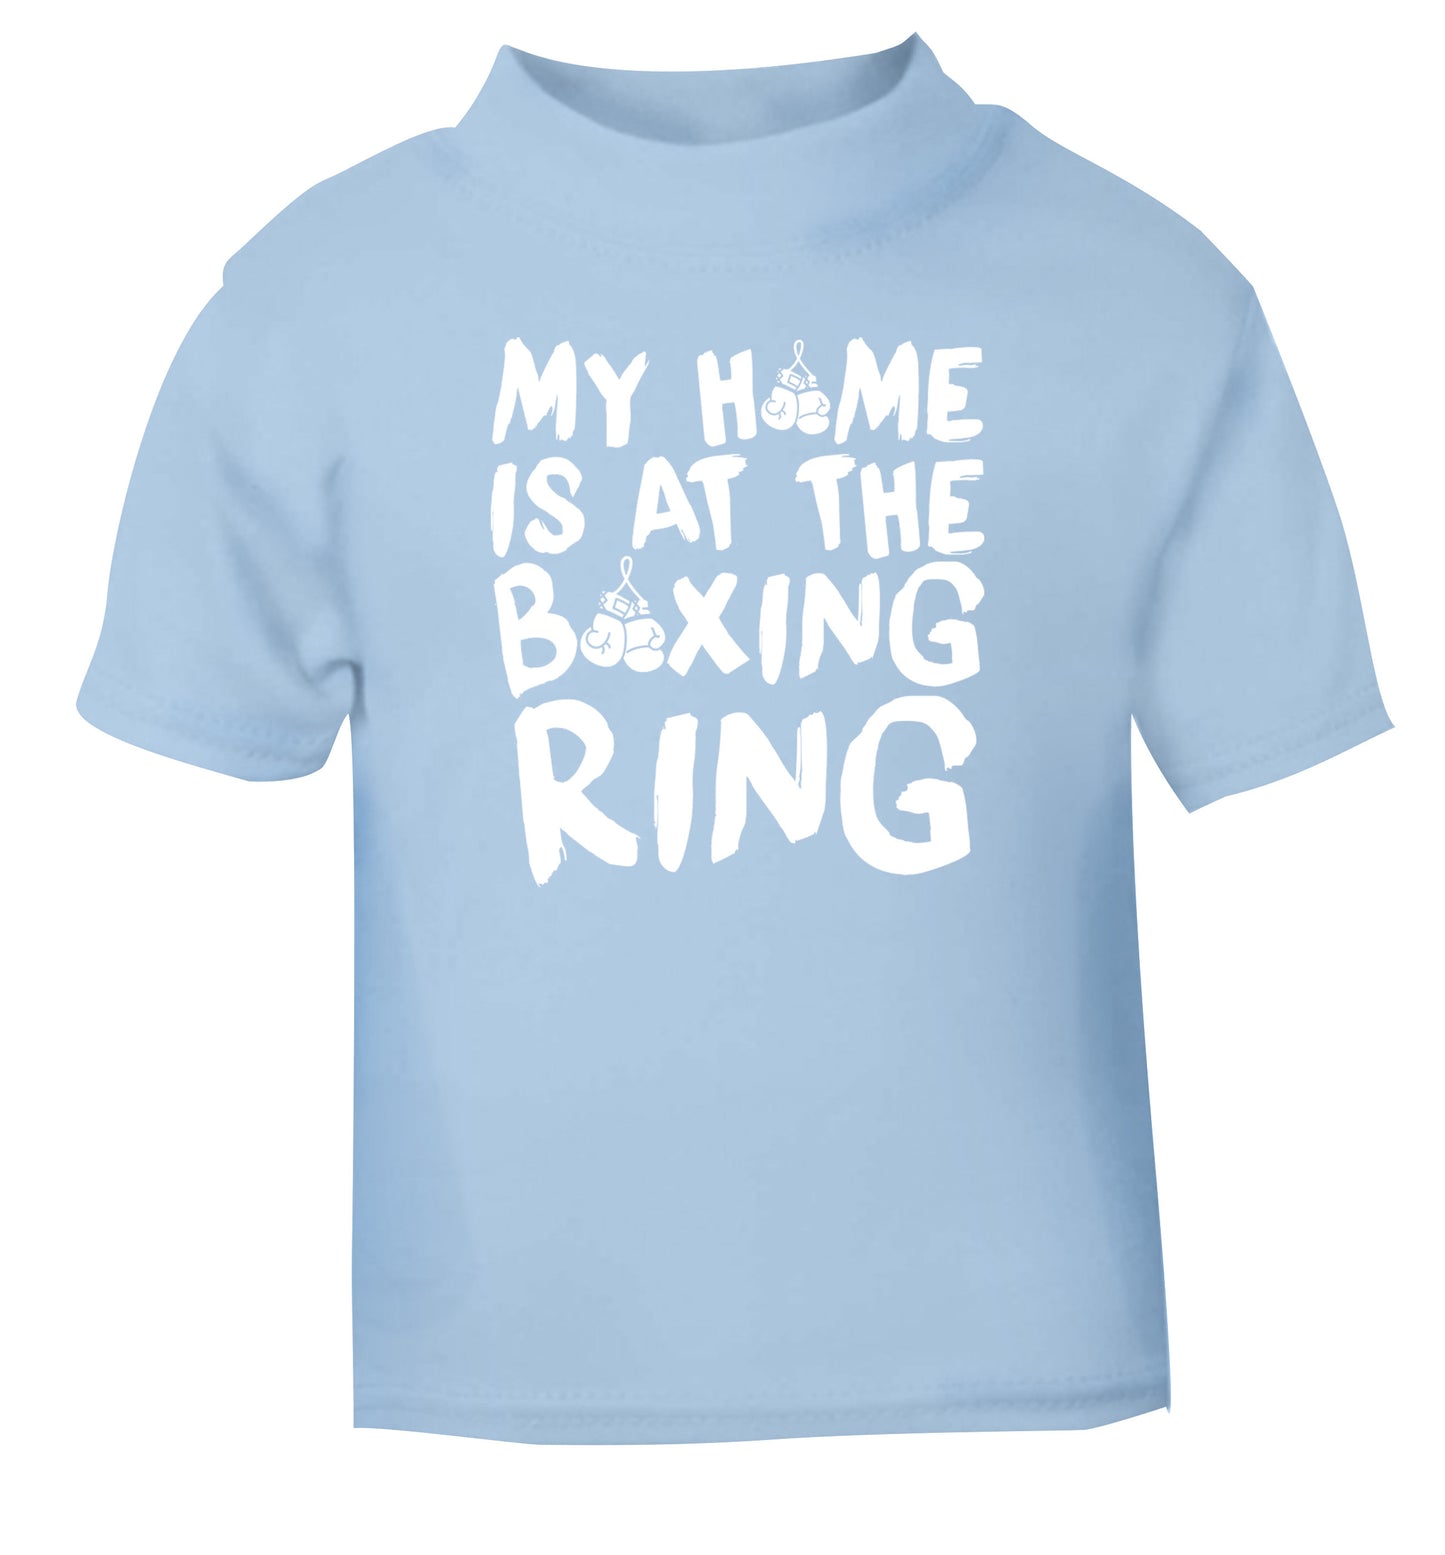 My home is at the boxing ring light blue Baby Toddler Tshirt 2 Years